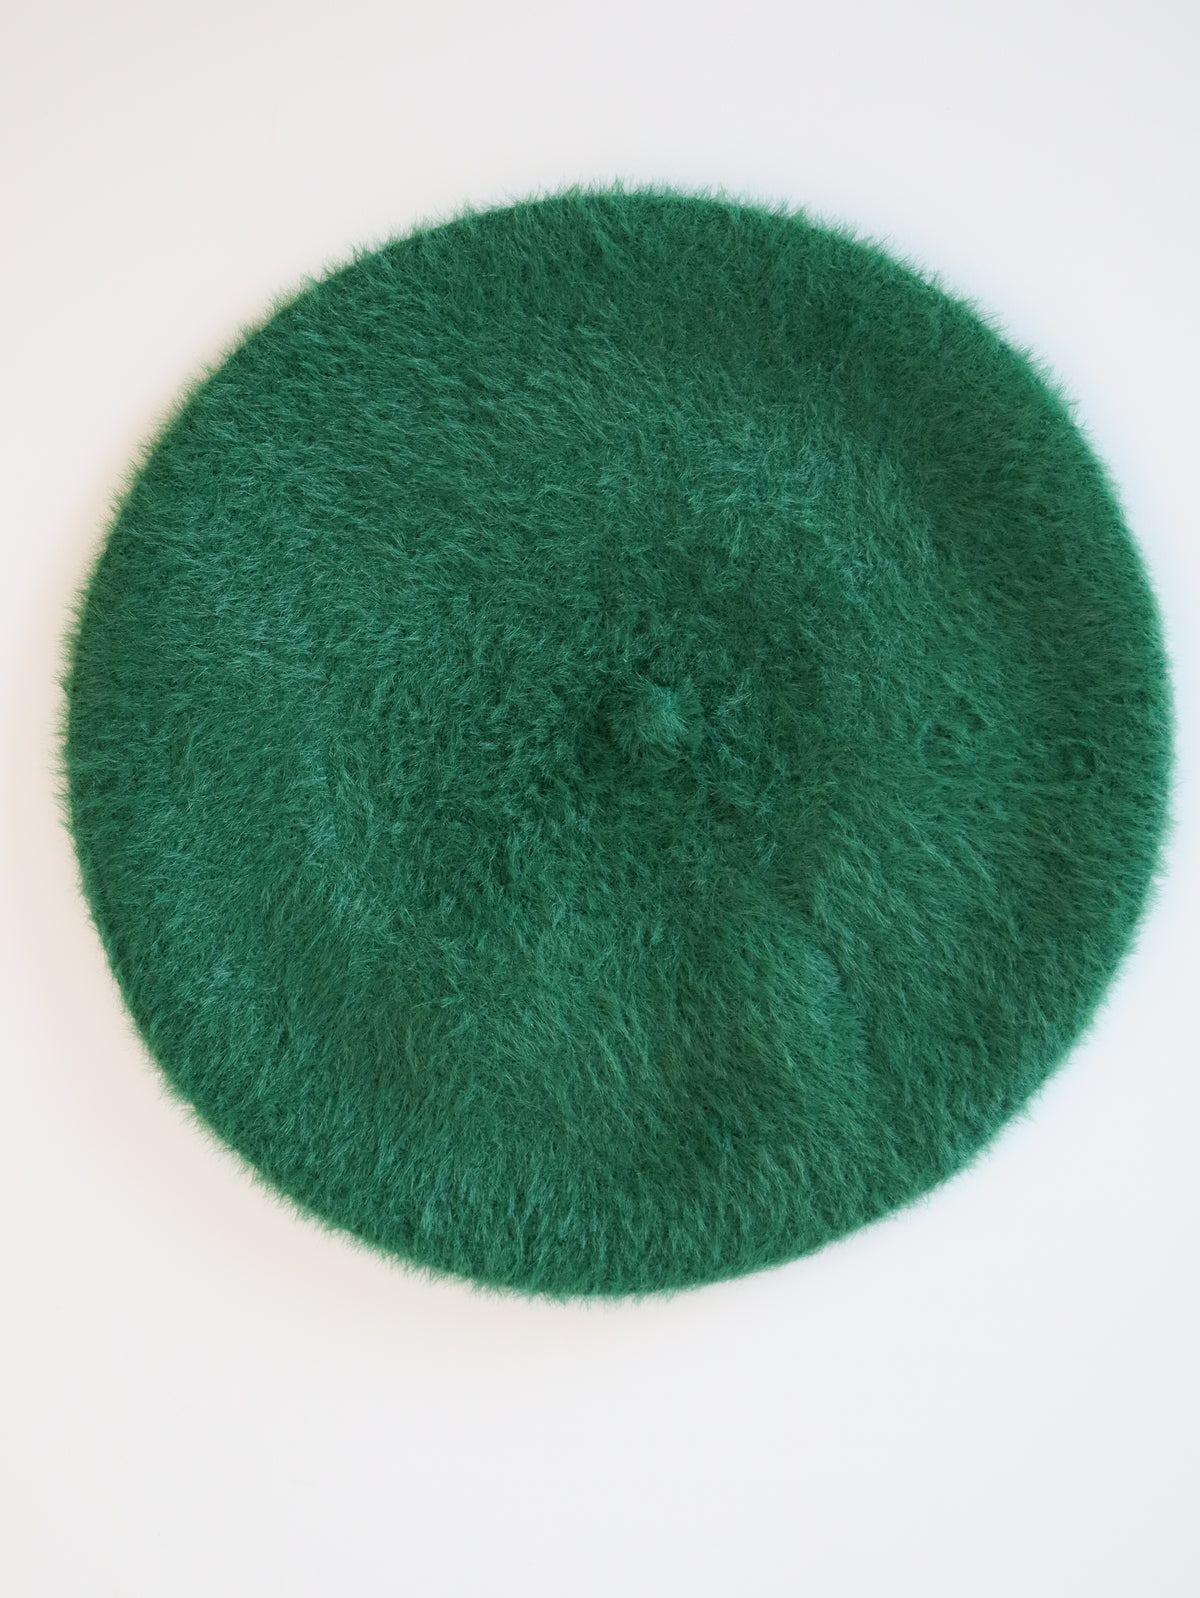 Beret Hat in Green